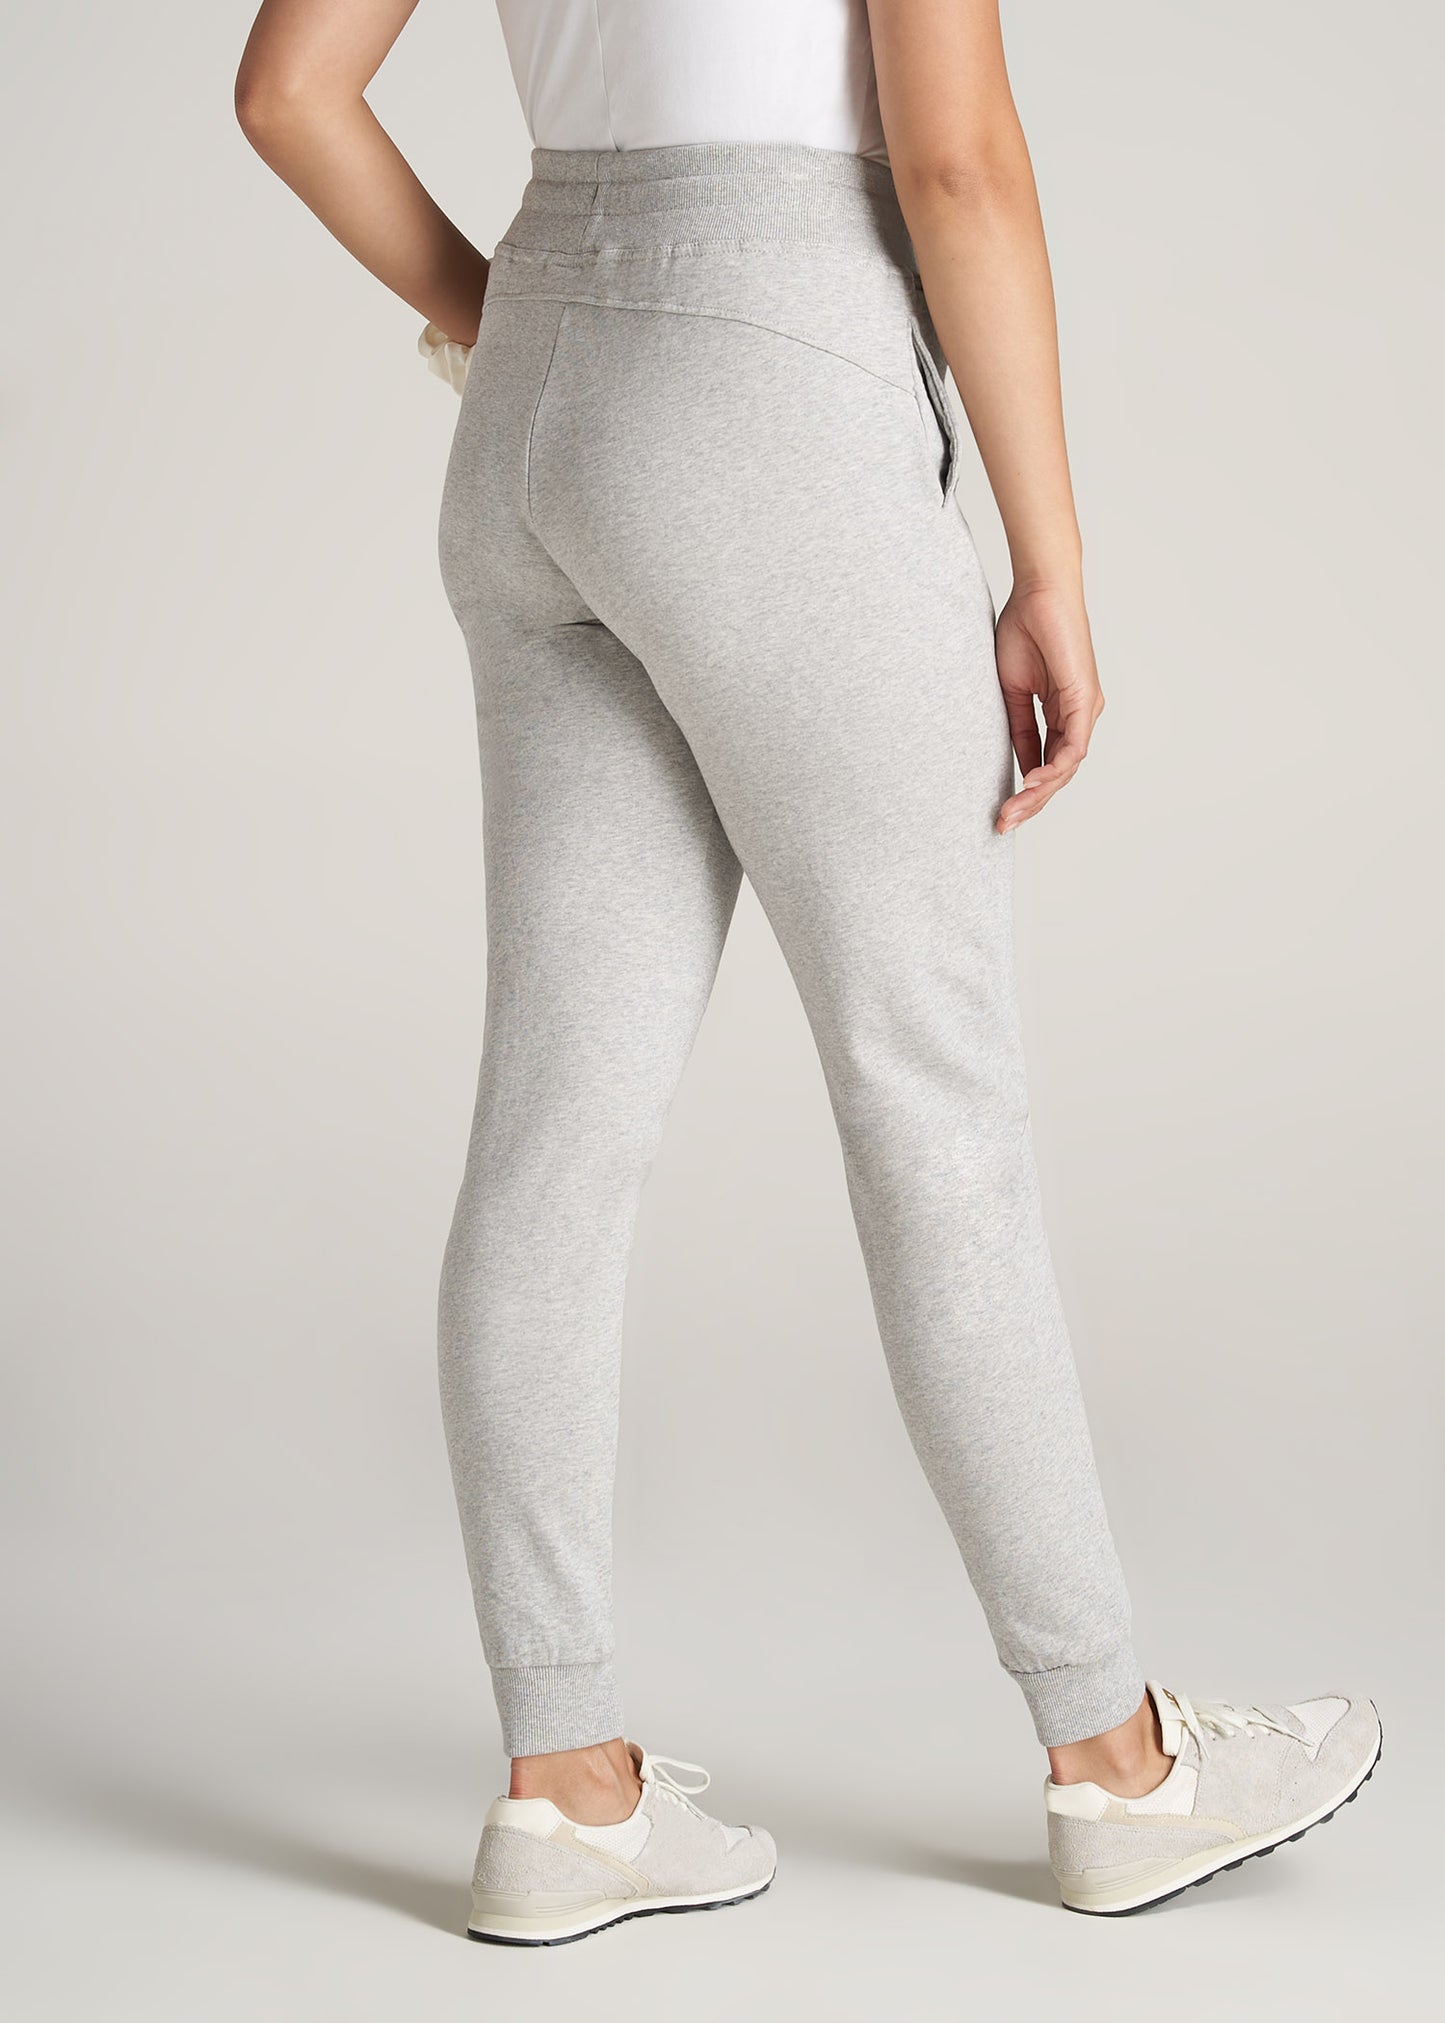    American-Tall-Women-FrenchTerry-Jogger-GreyMix-back